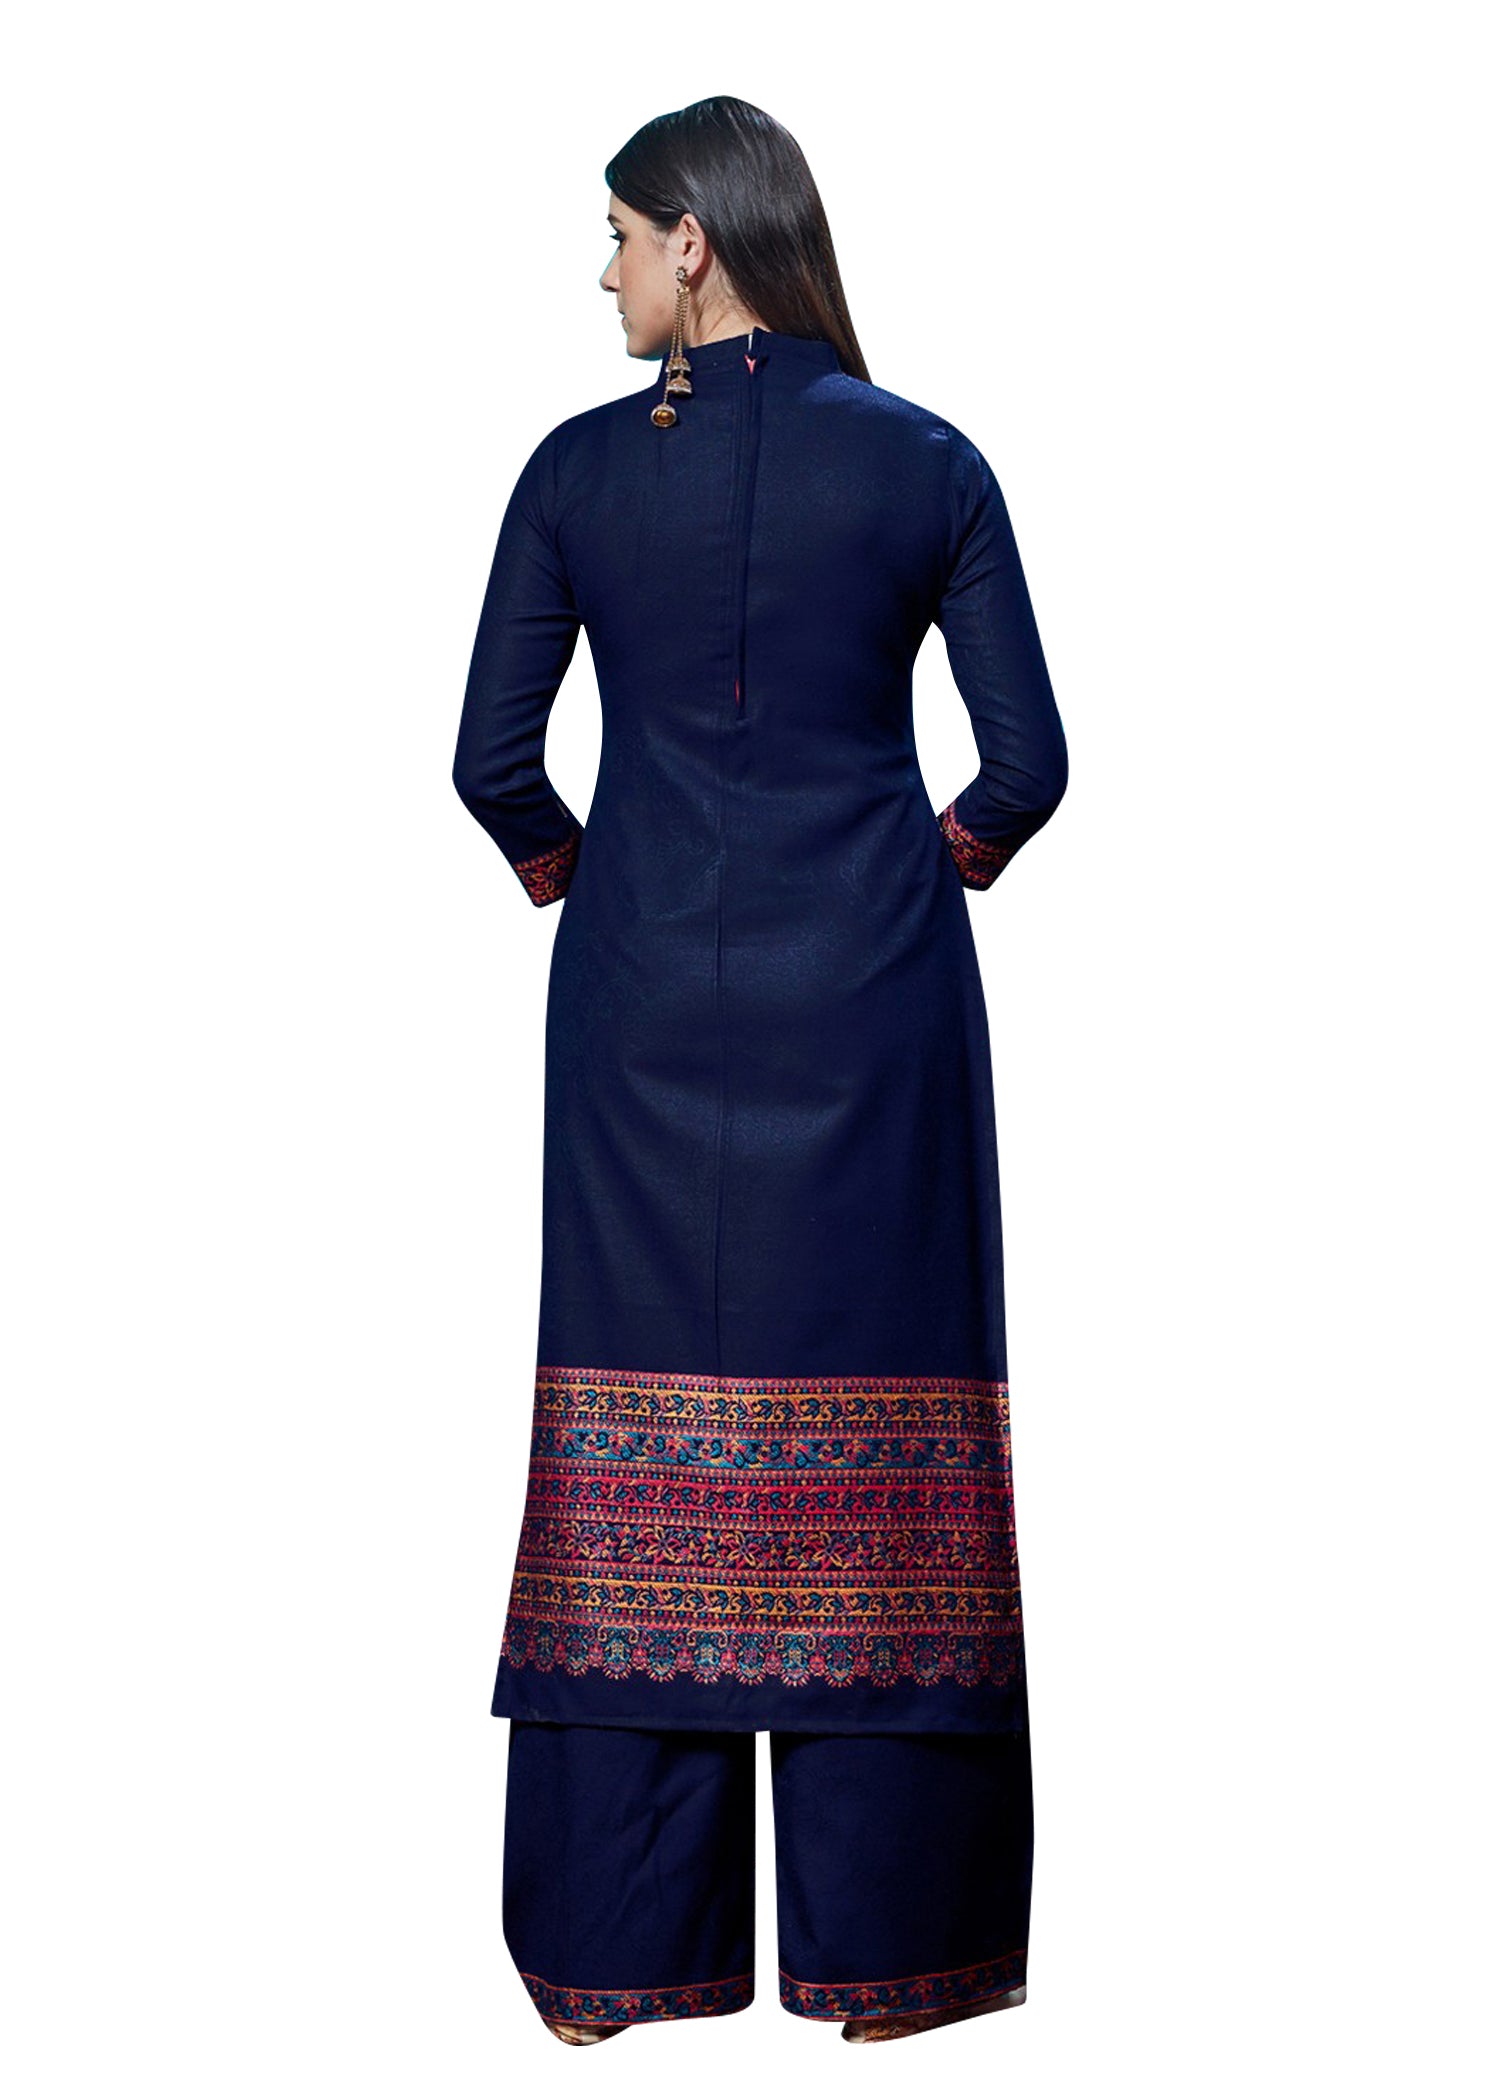 ACRO WOOL NAVY DRESS MATERIAL WITH STOLE